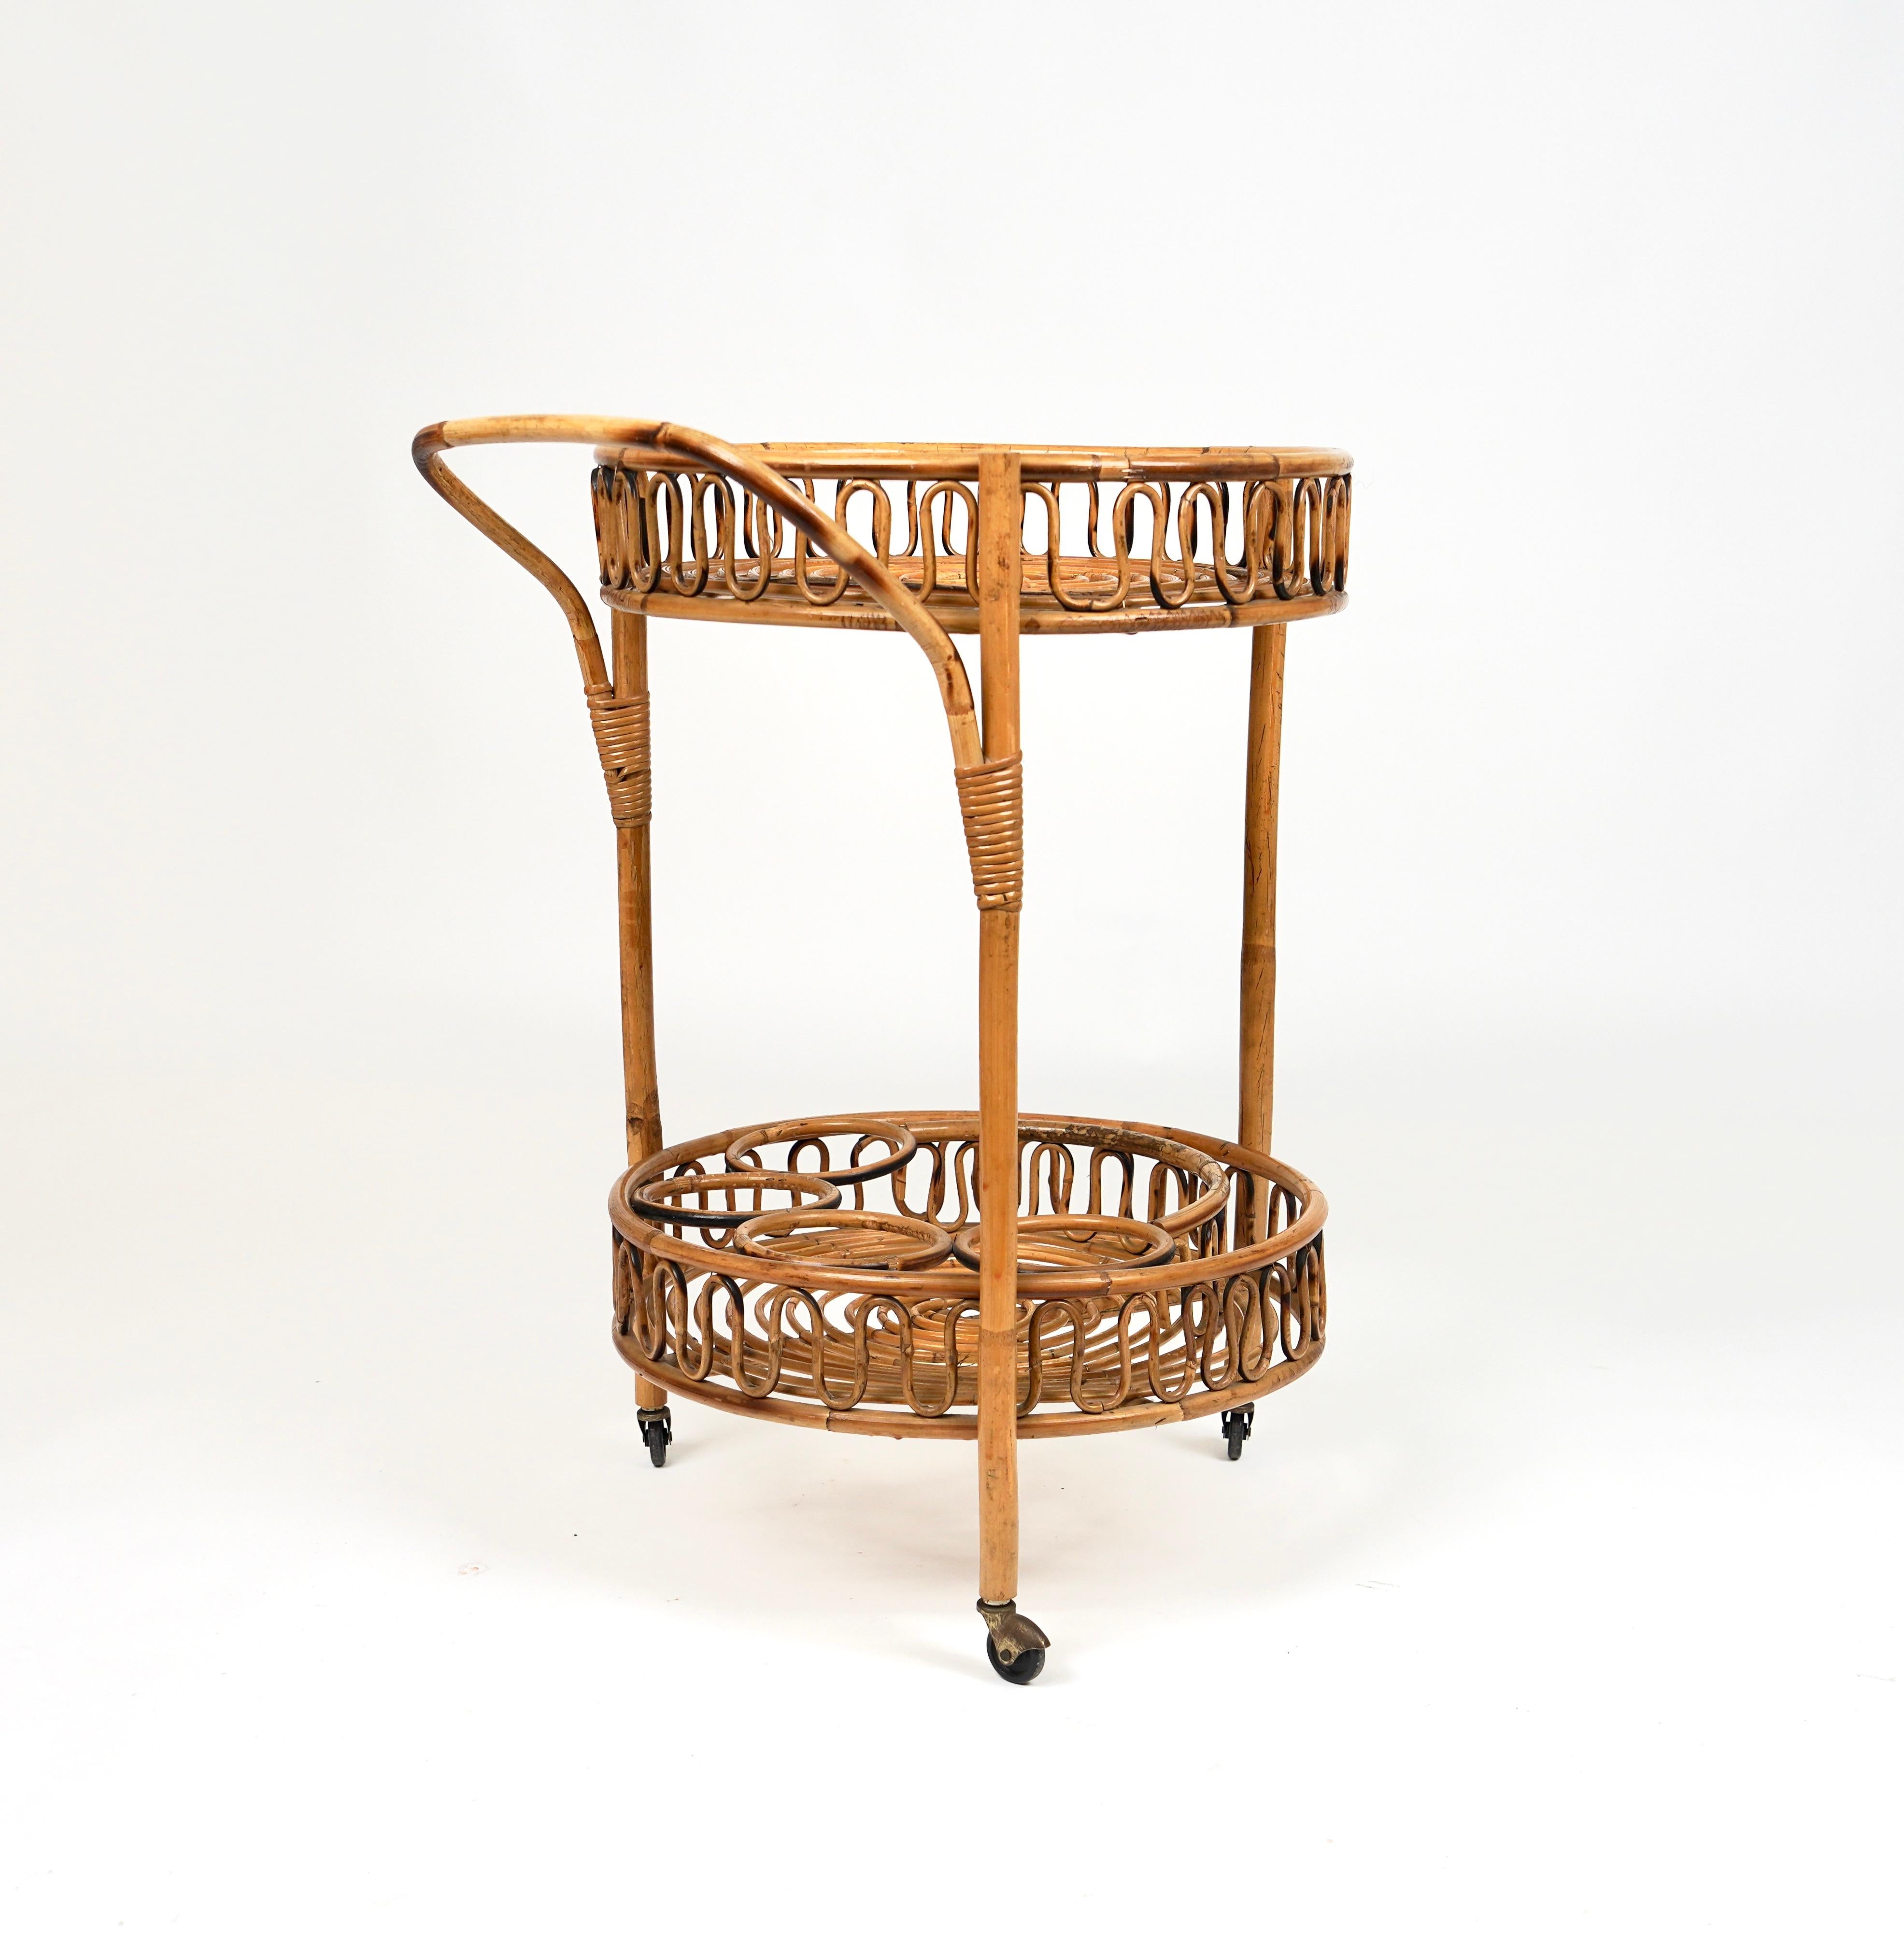 Midcentury Bamboo and Rattan Round Serving Bar Cart Trolley, Italy, circa 1960s For Sale 2